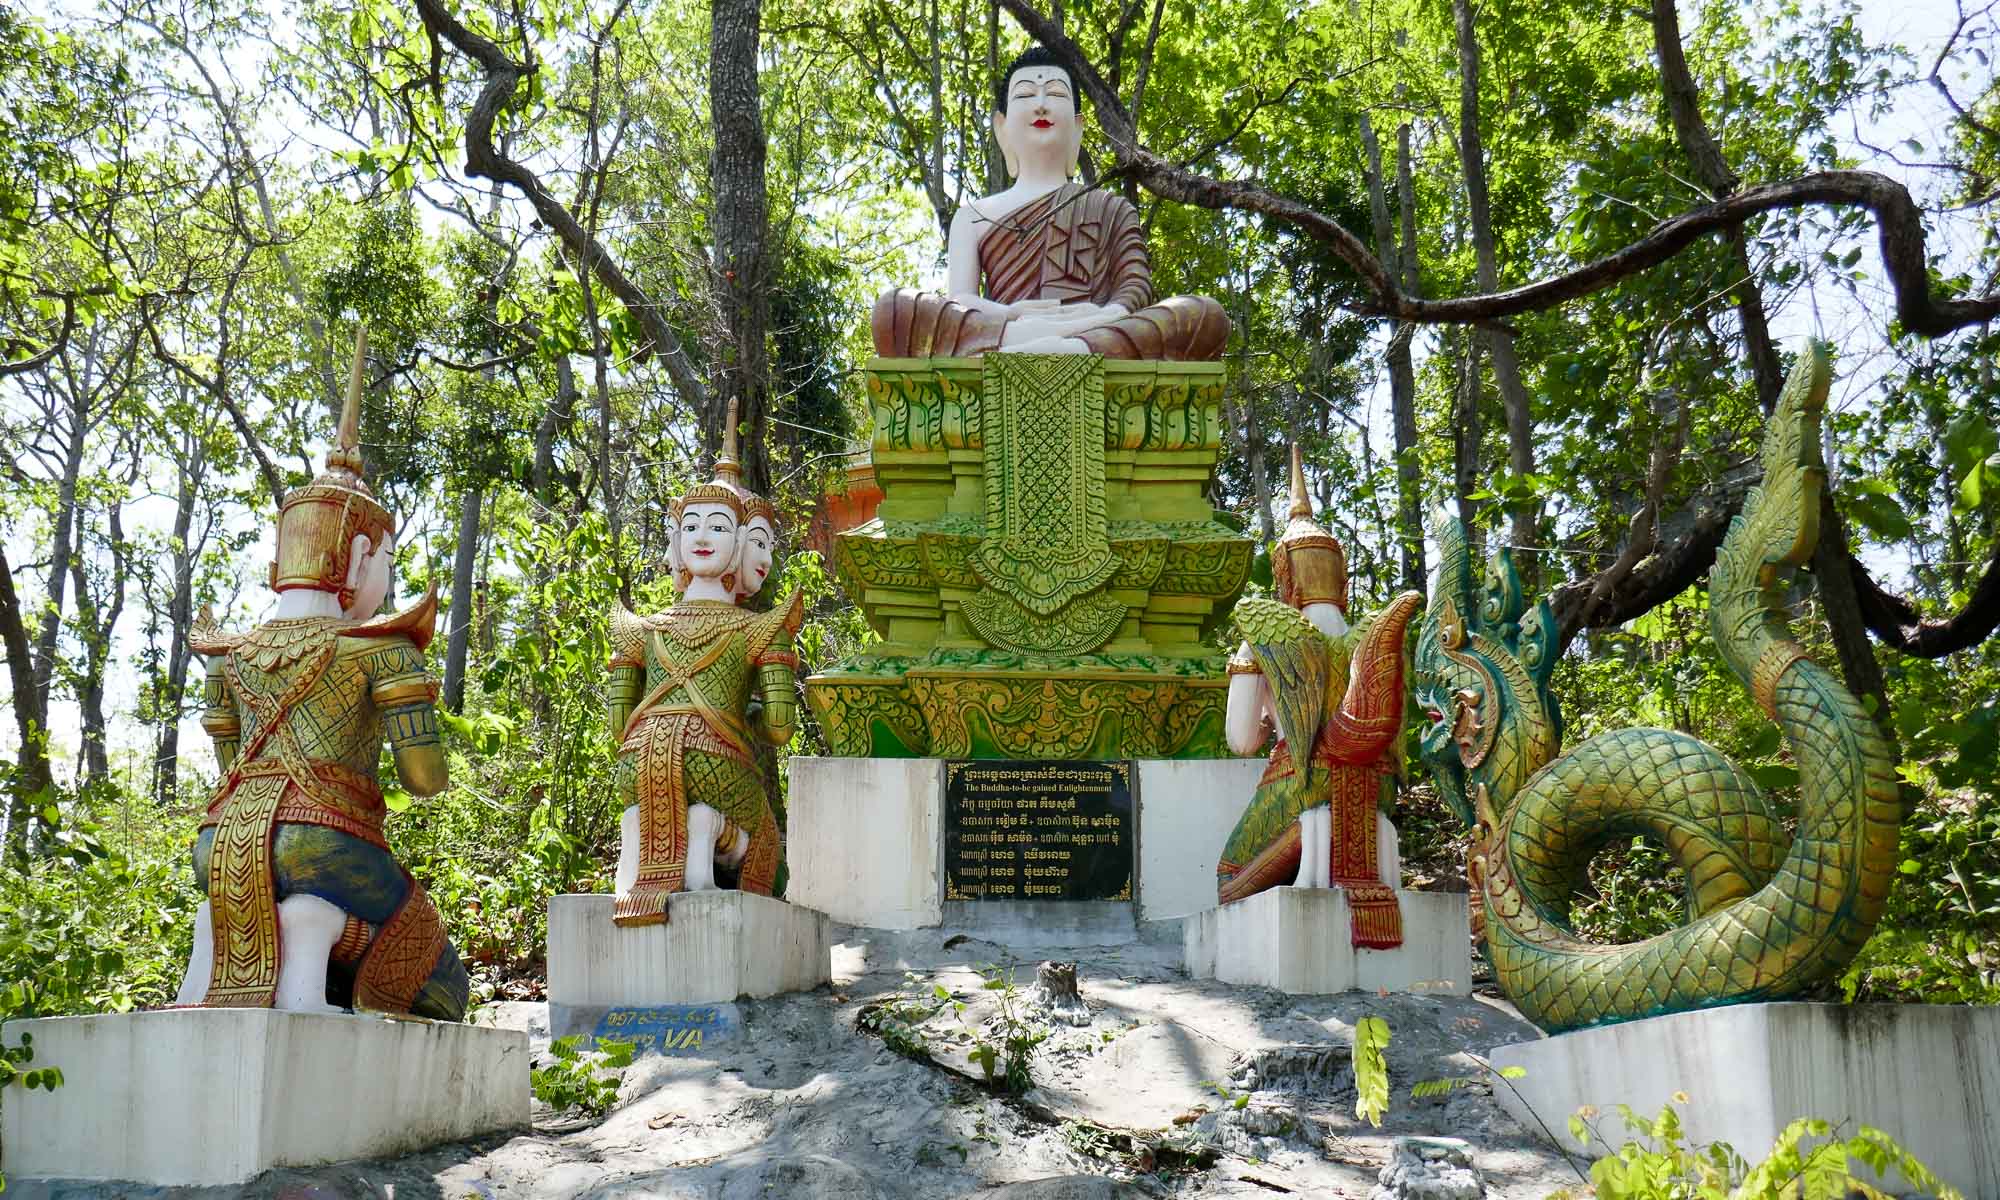 Several statues can be found on the mountain